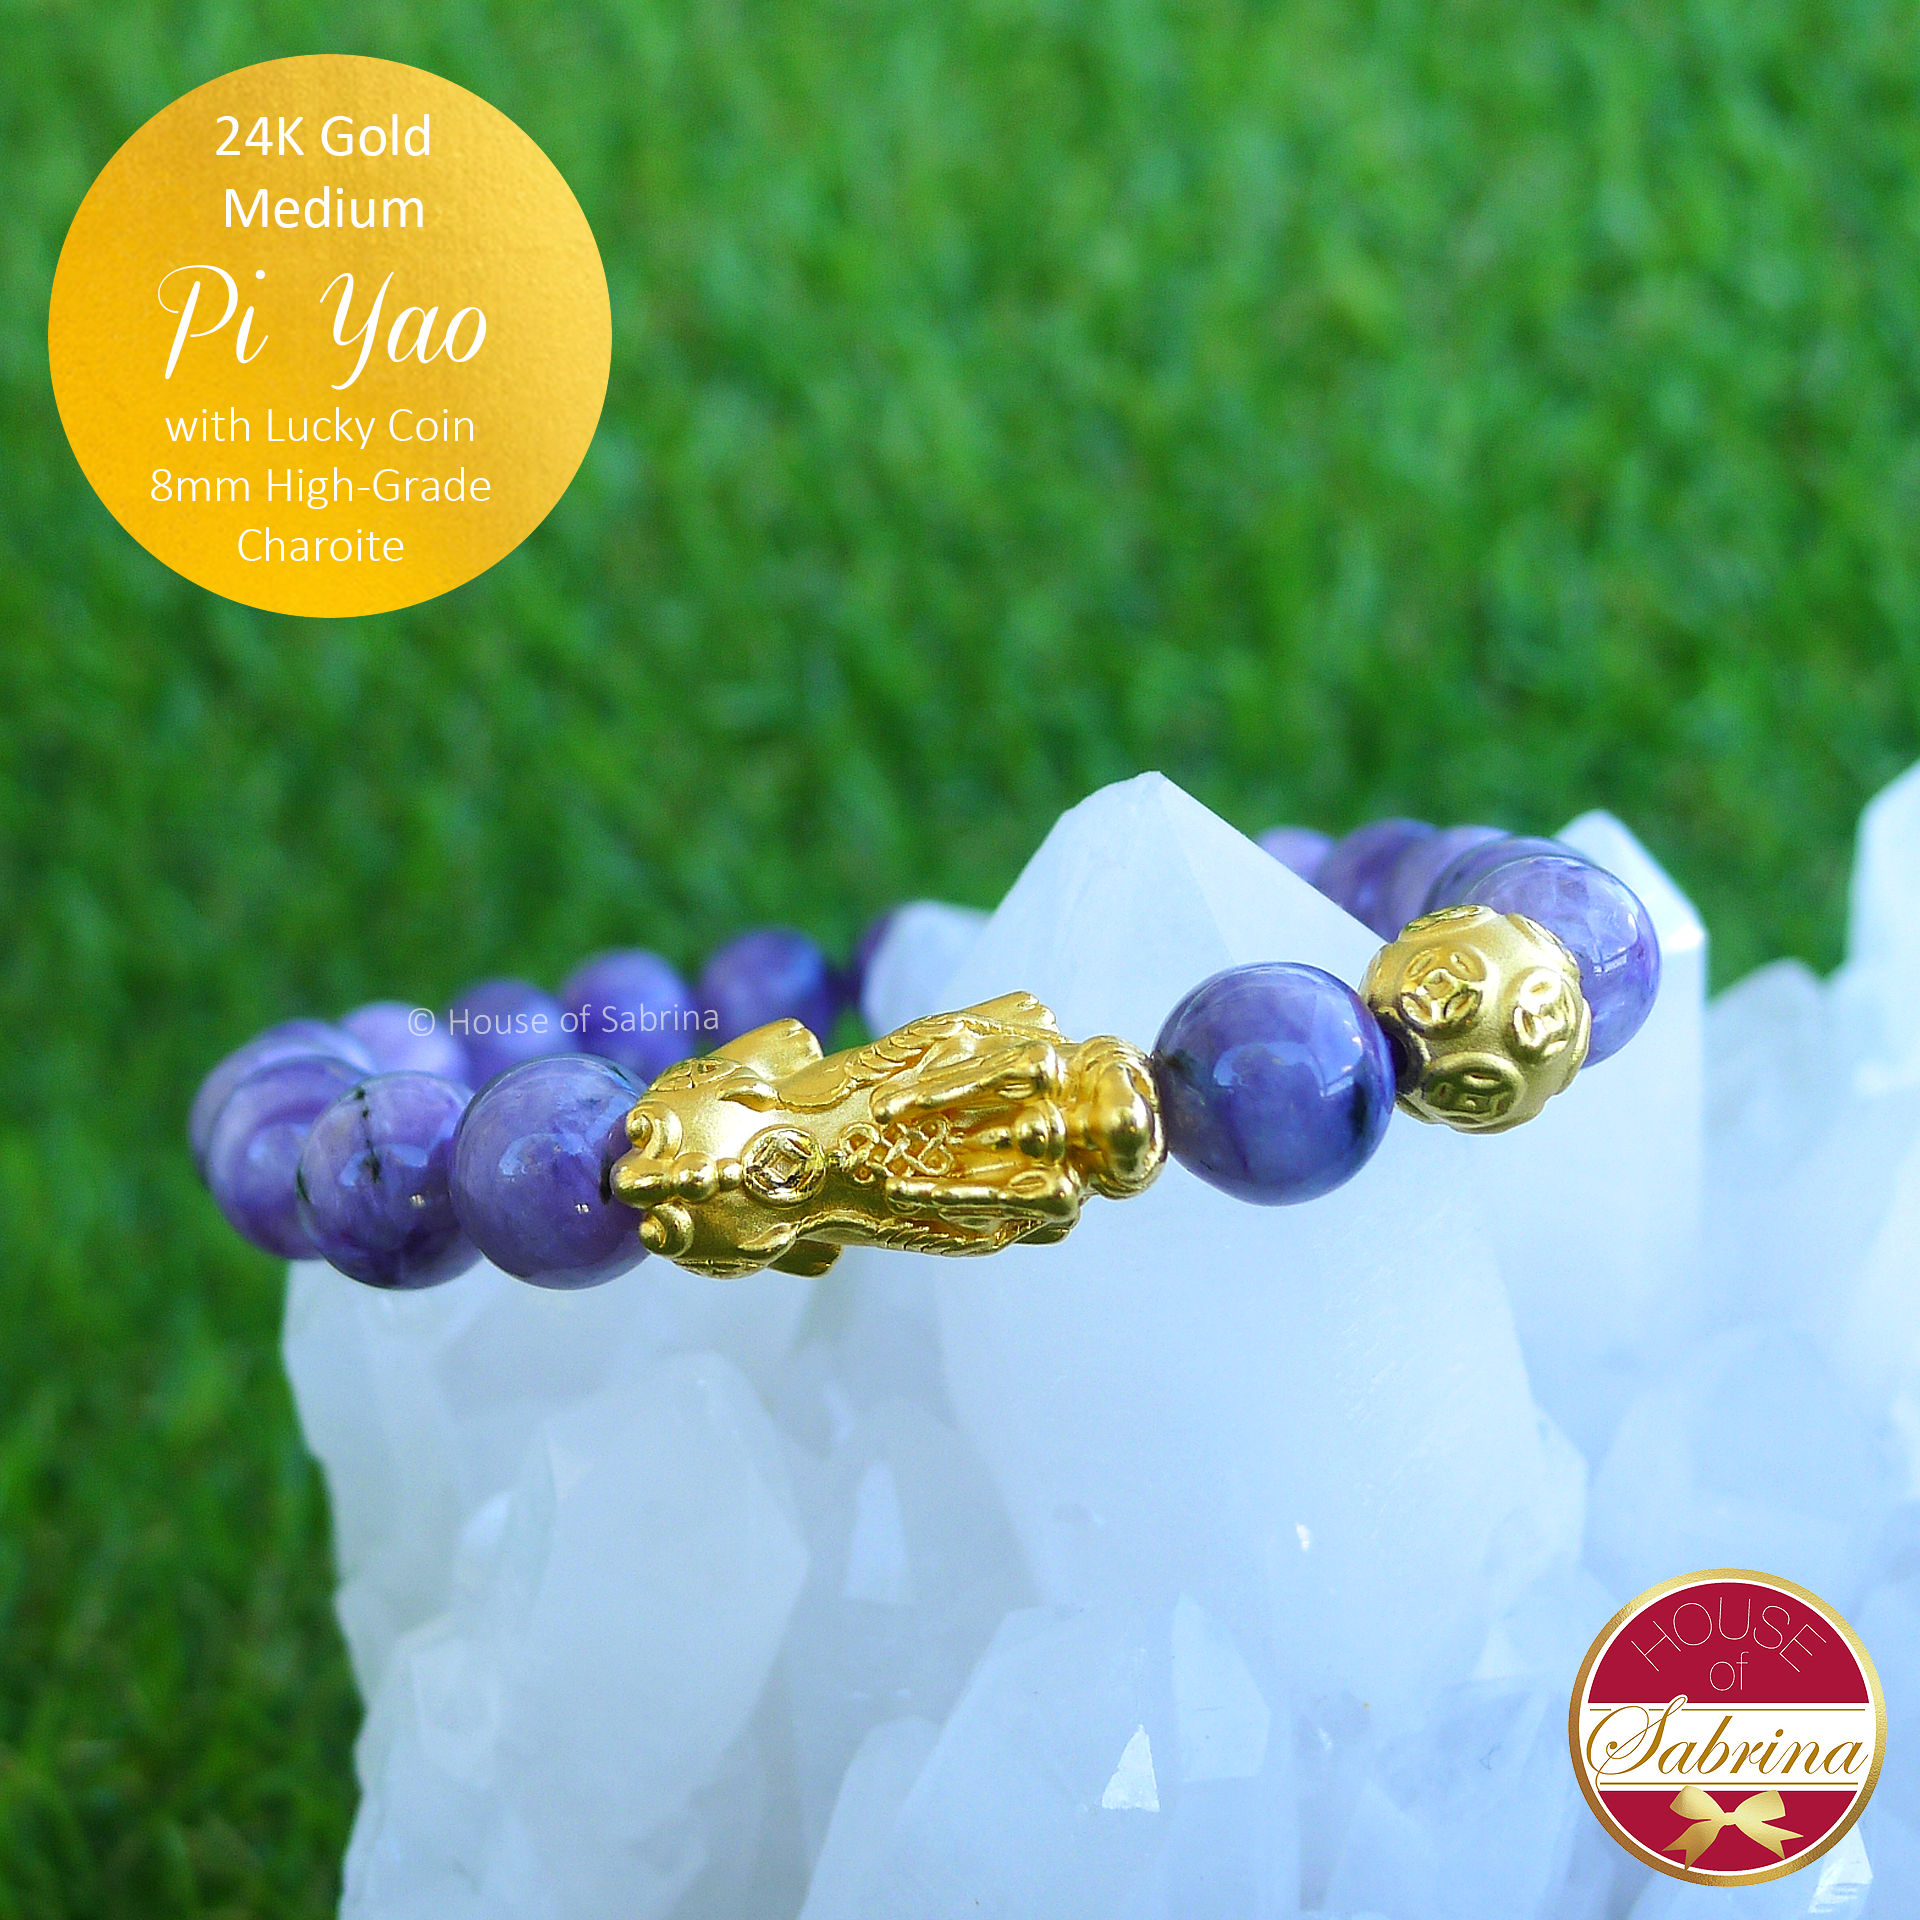 24K Gold Medium Pi Yao with Lucky Coin on High Grade Charoite